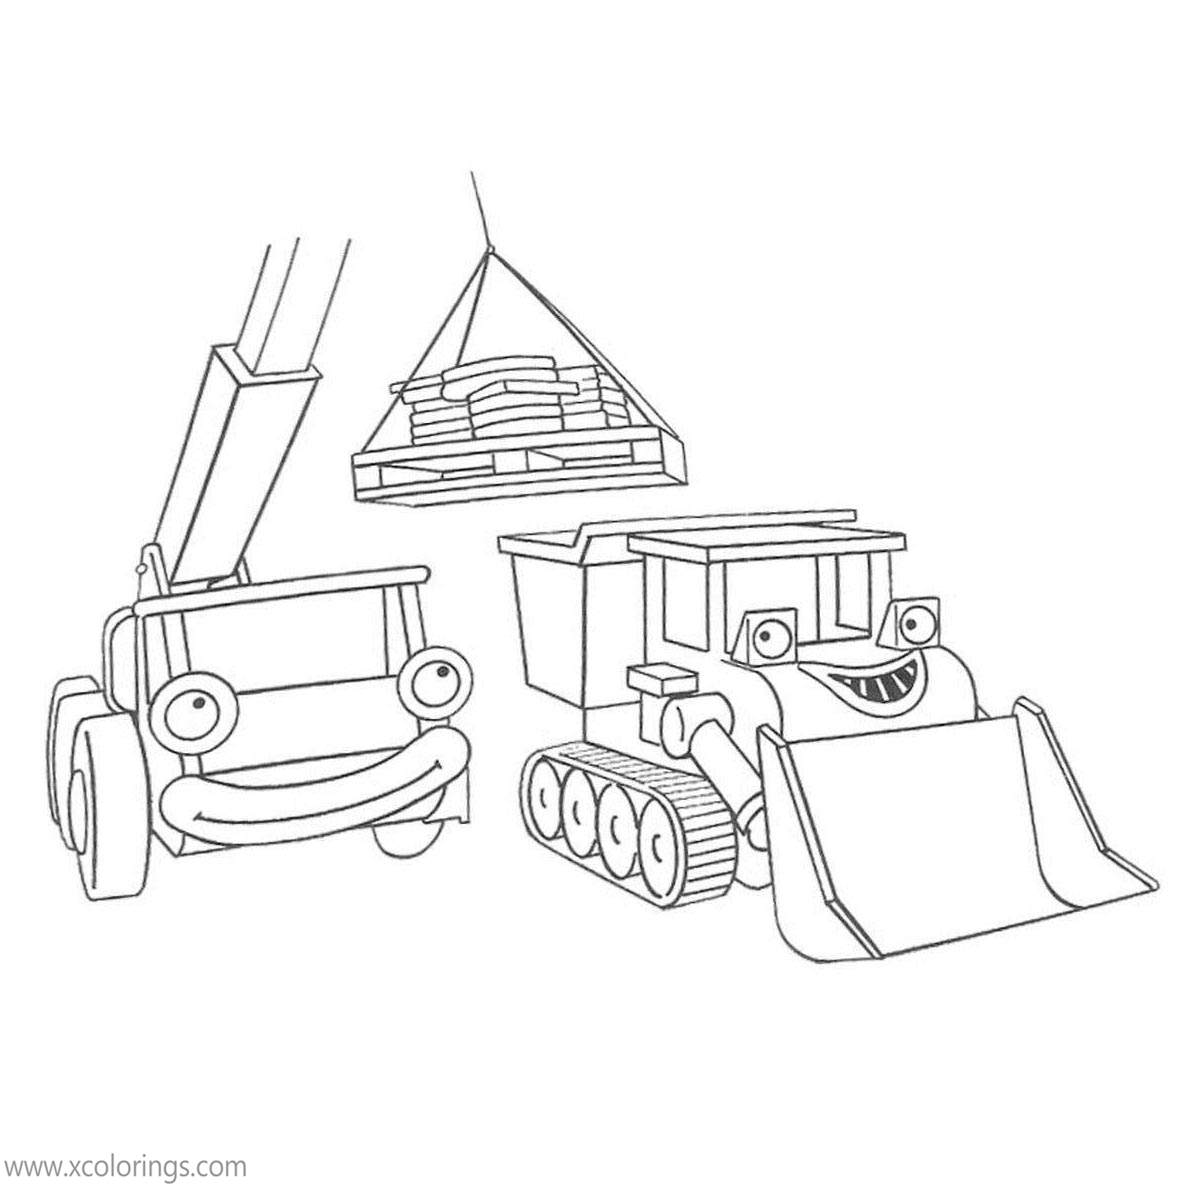 Free Bob the Builder Coloring Pages Lofty Working with Muck printable